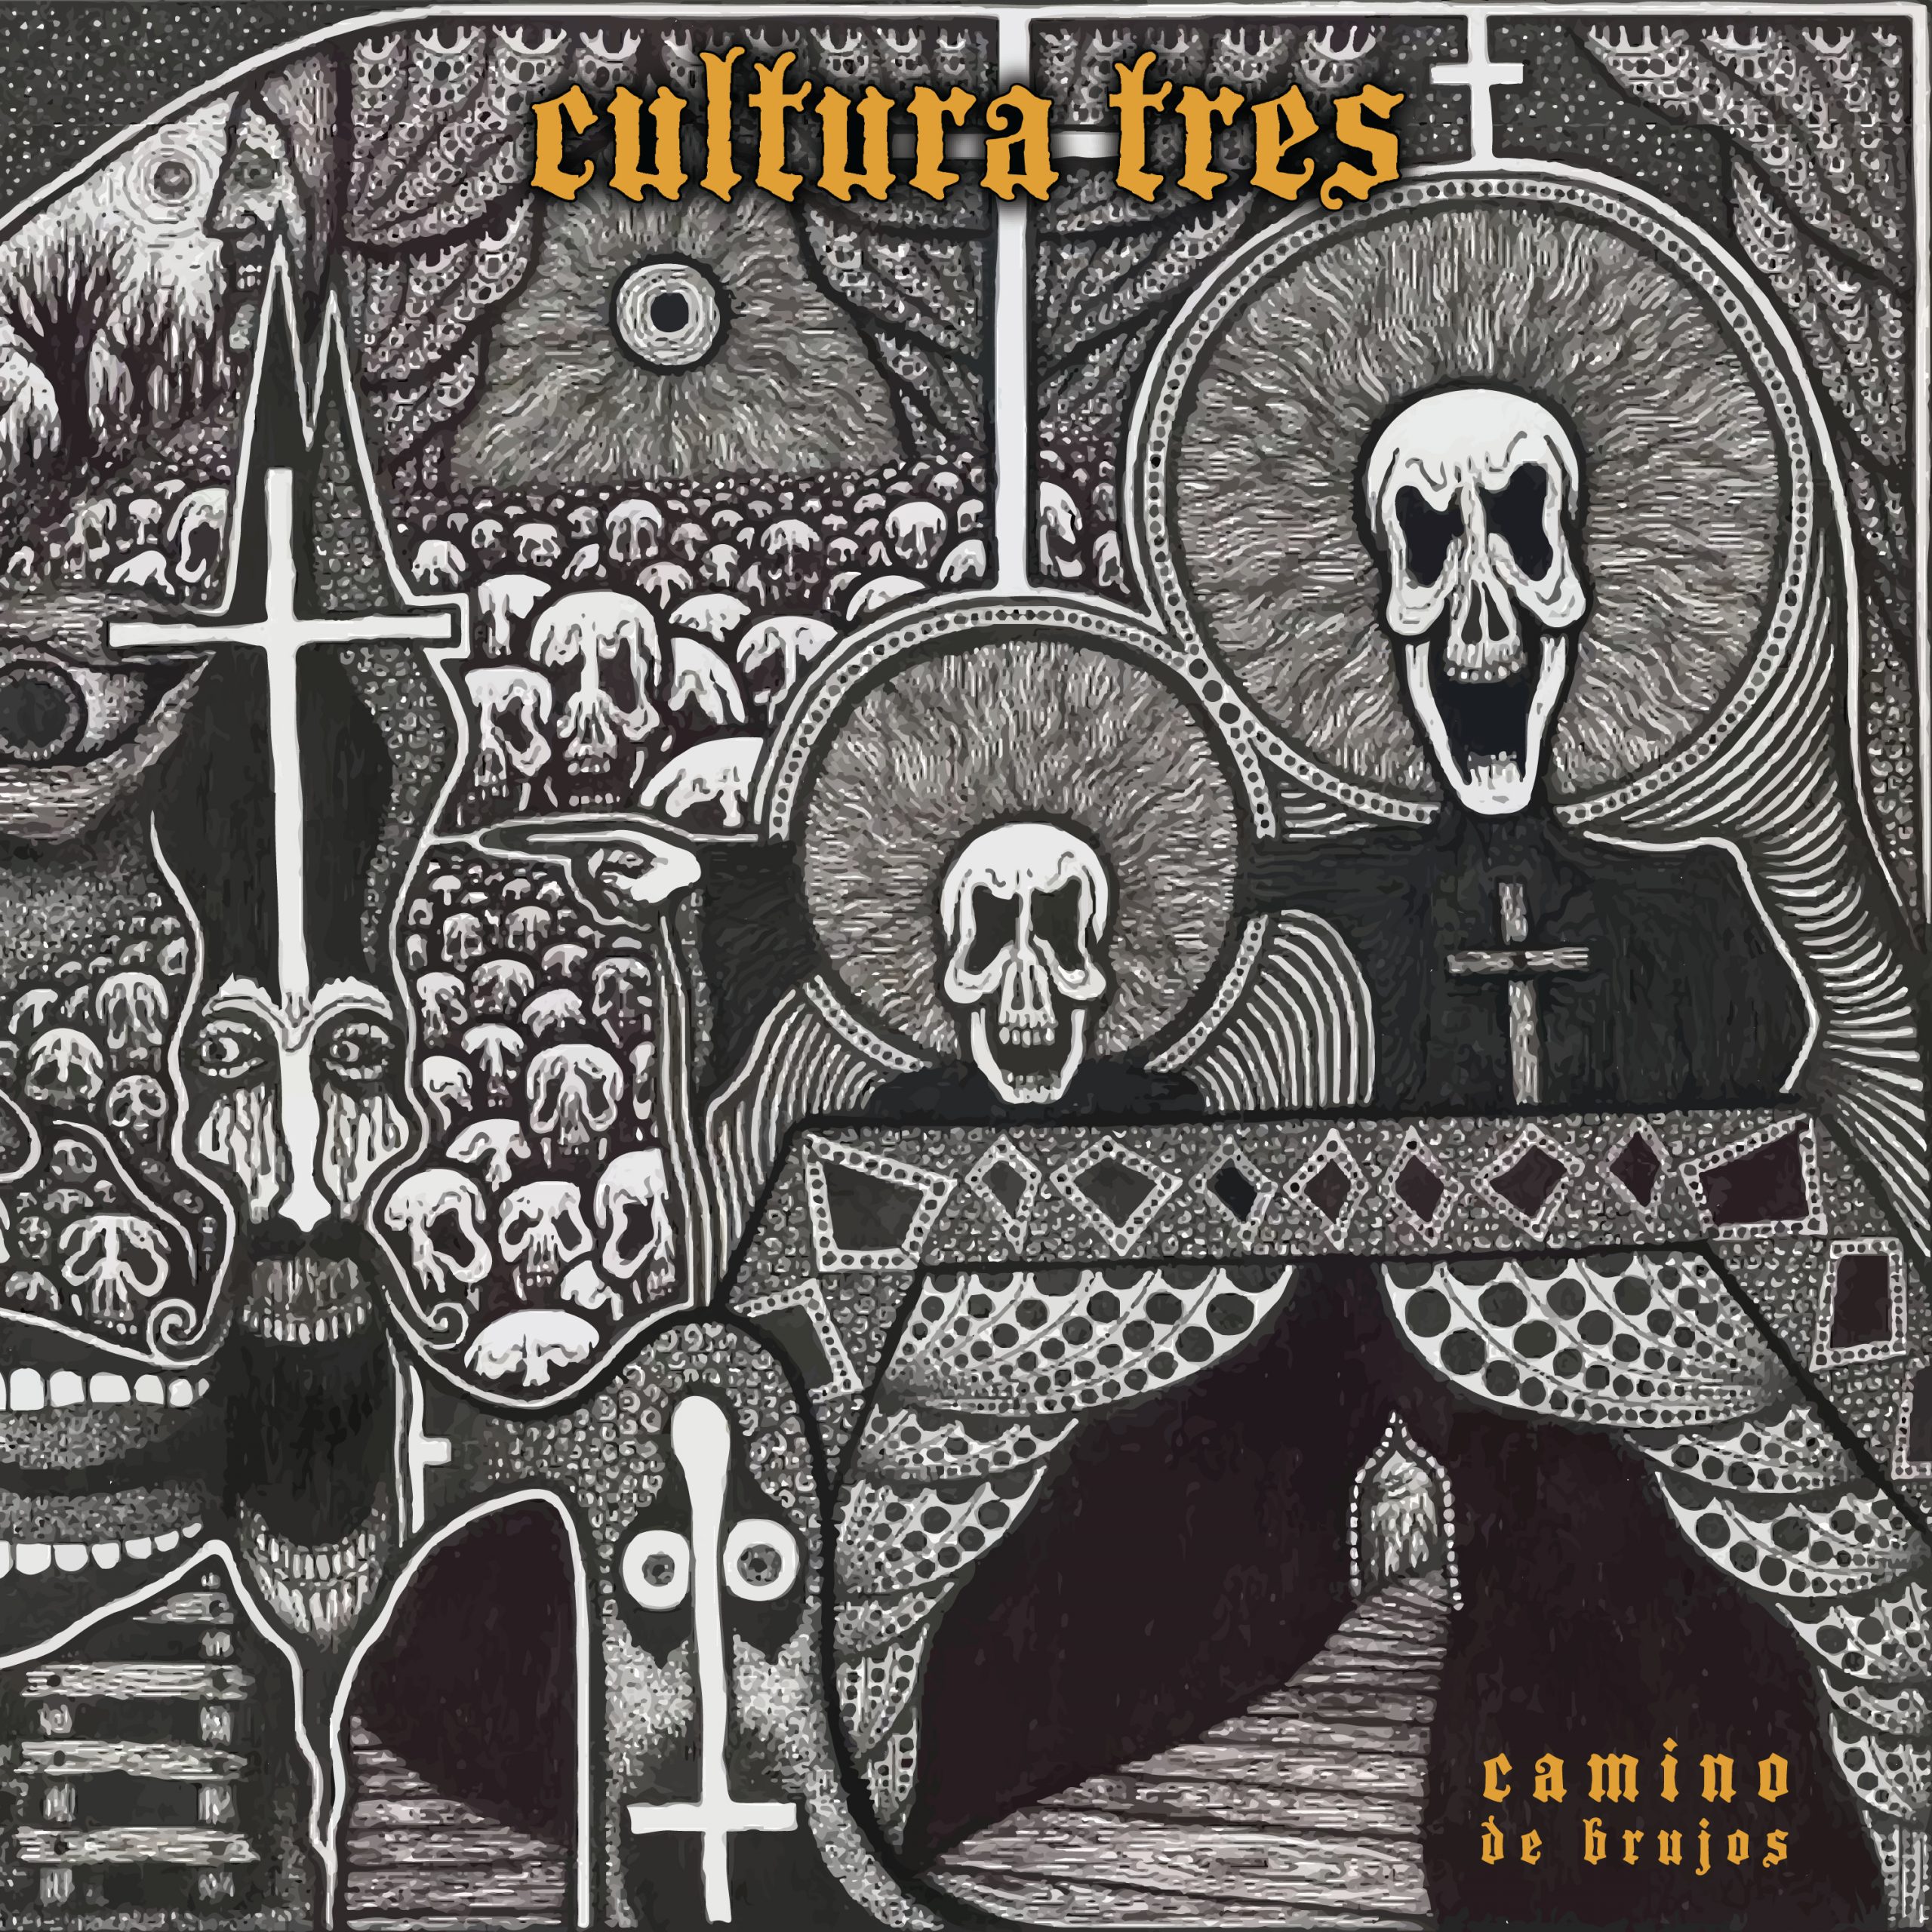 As dense and heavy as the subject of its lyrics, CULTURA TRES release “The Land” putting the spotlight on saving the Amazon Forest.